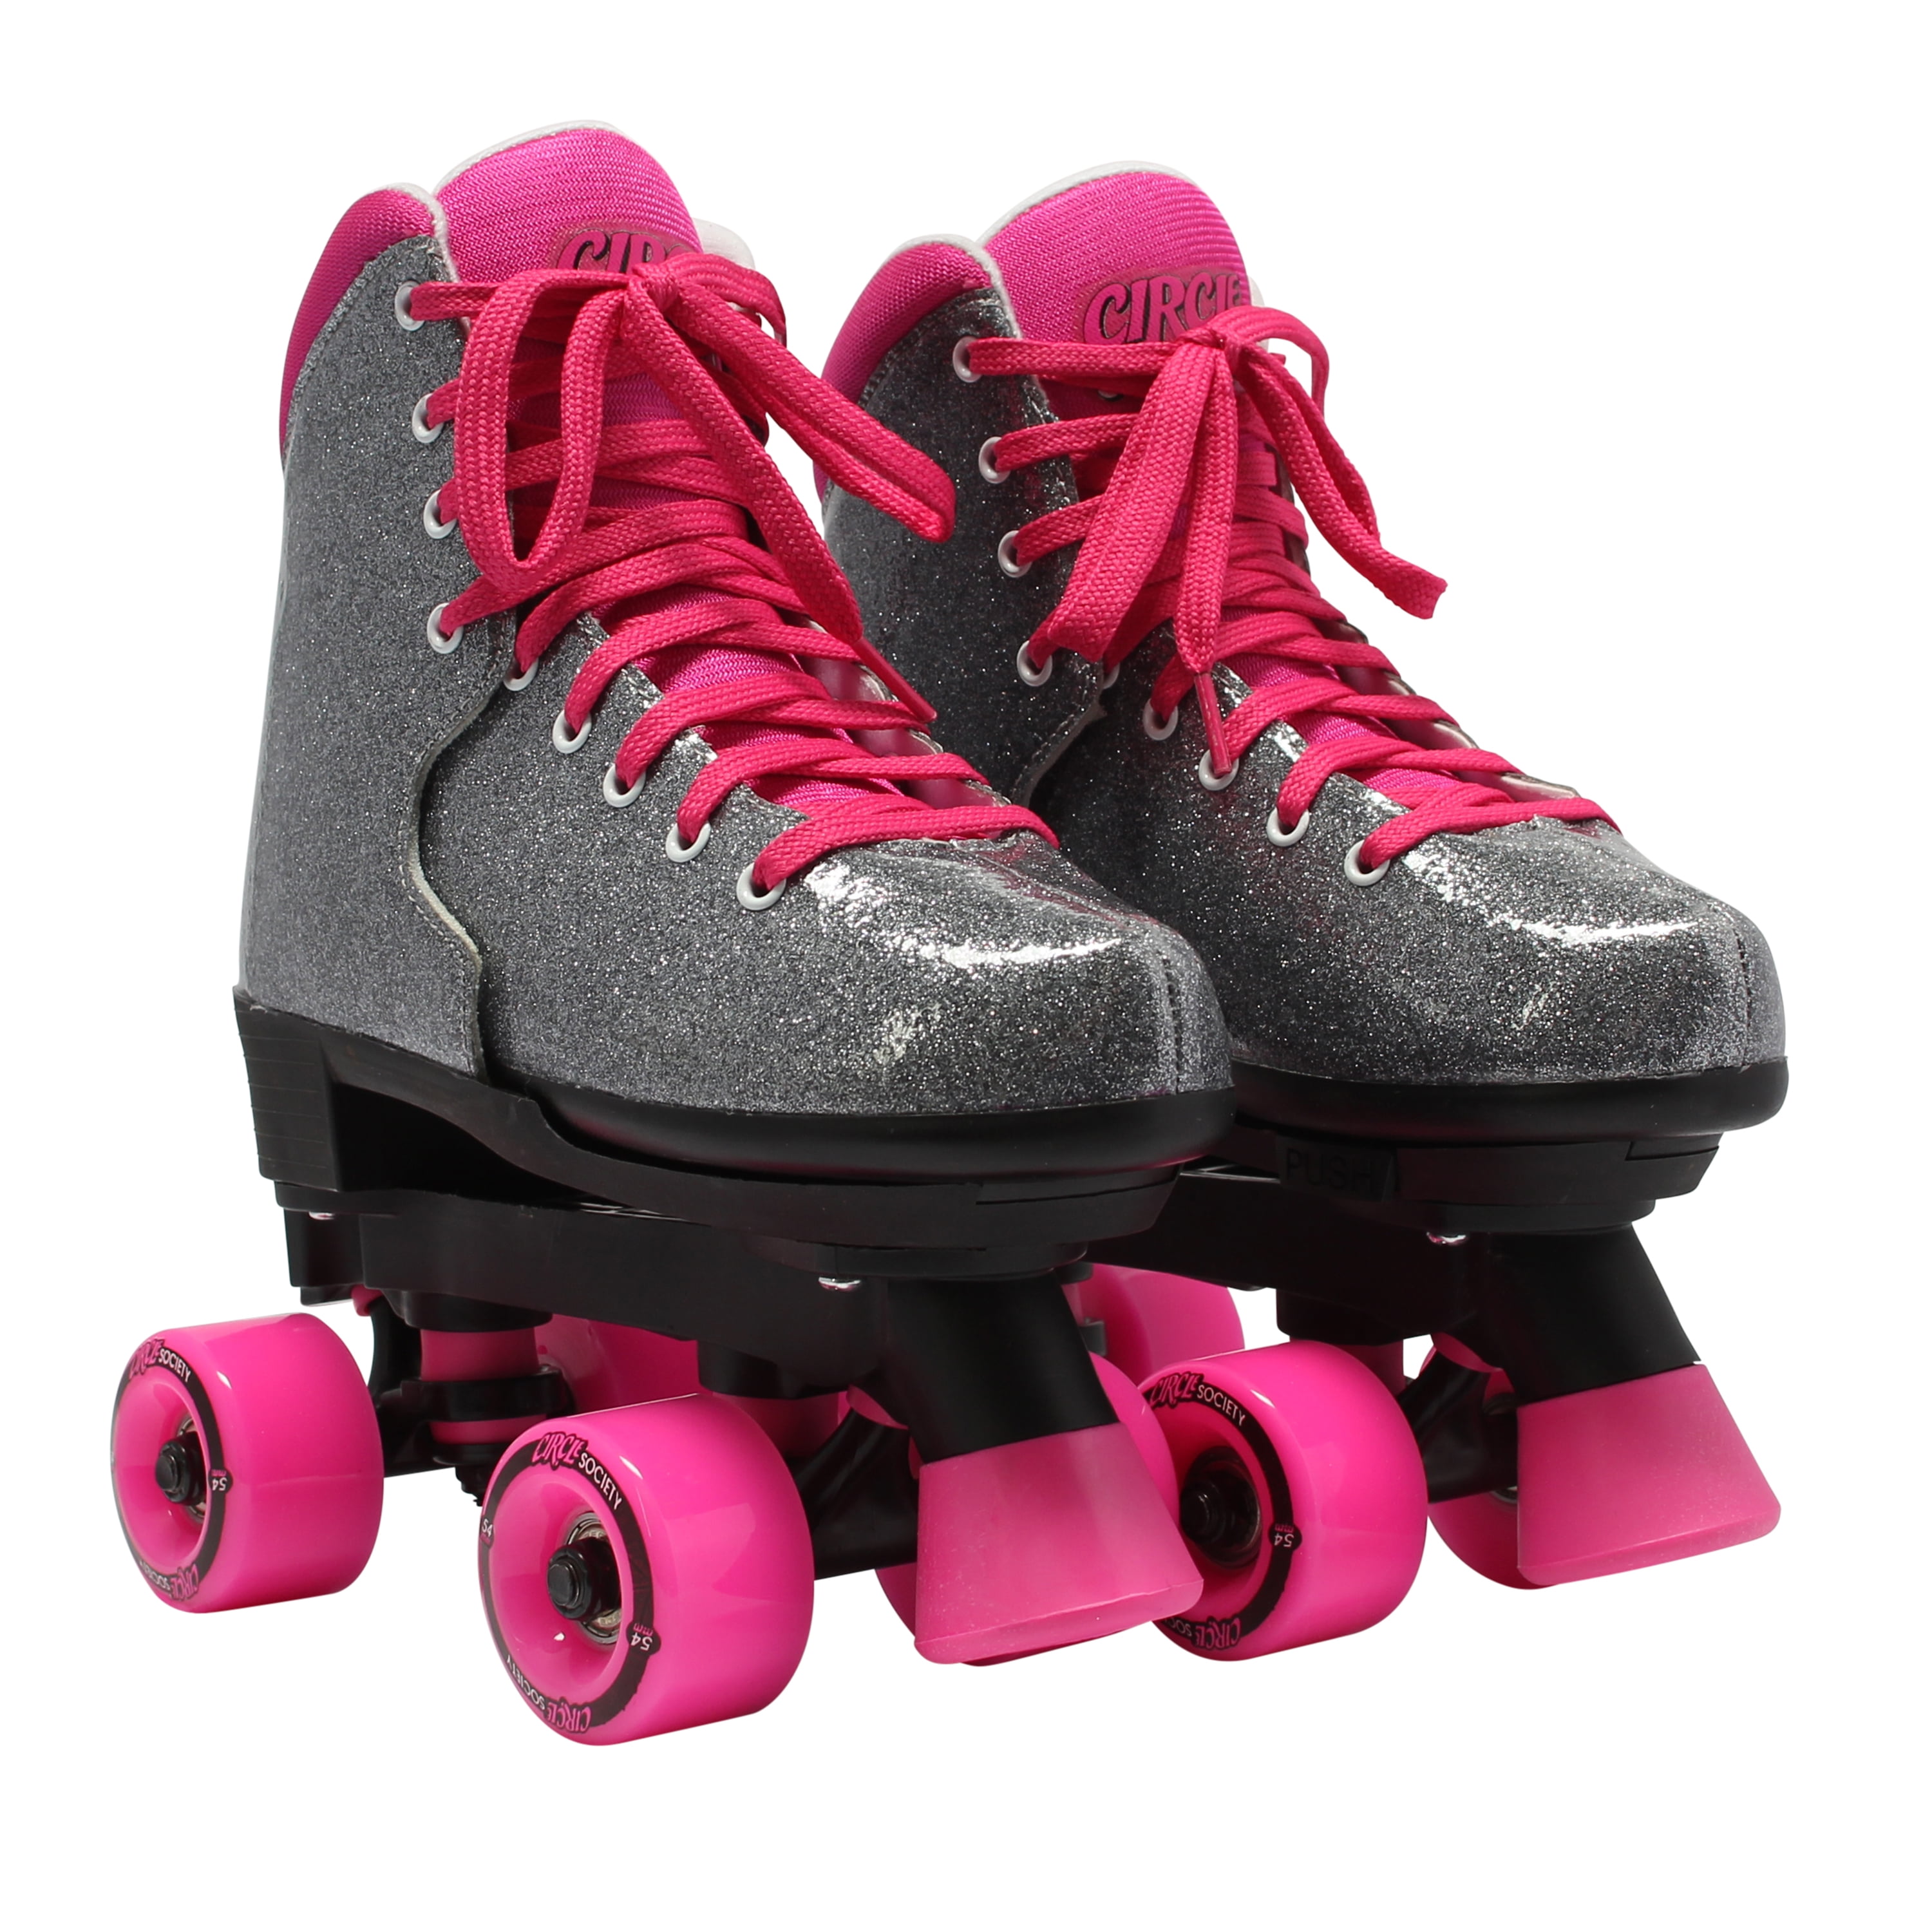 Pink Circles on Circles Boot Covers for Roller Skates and Ice Skates  S M 